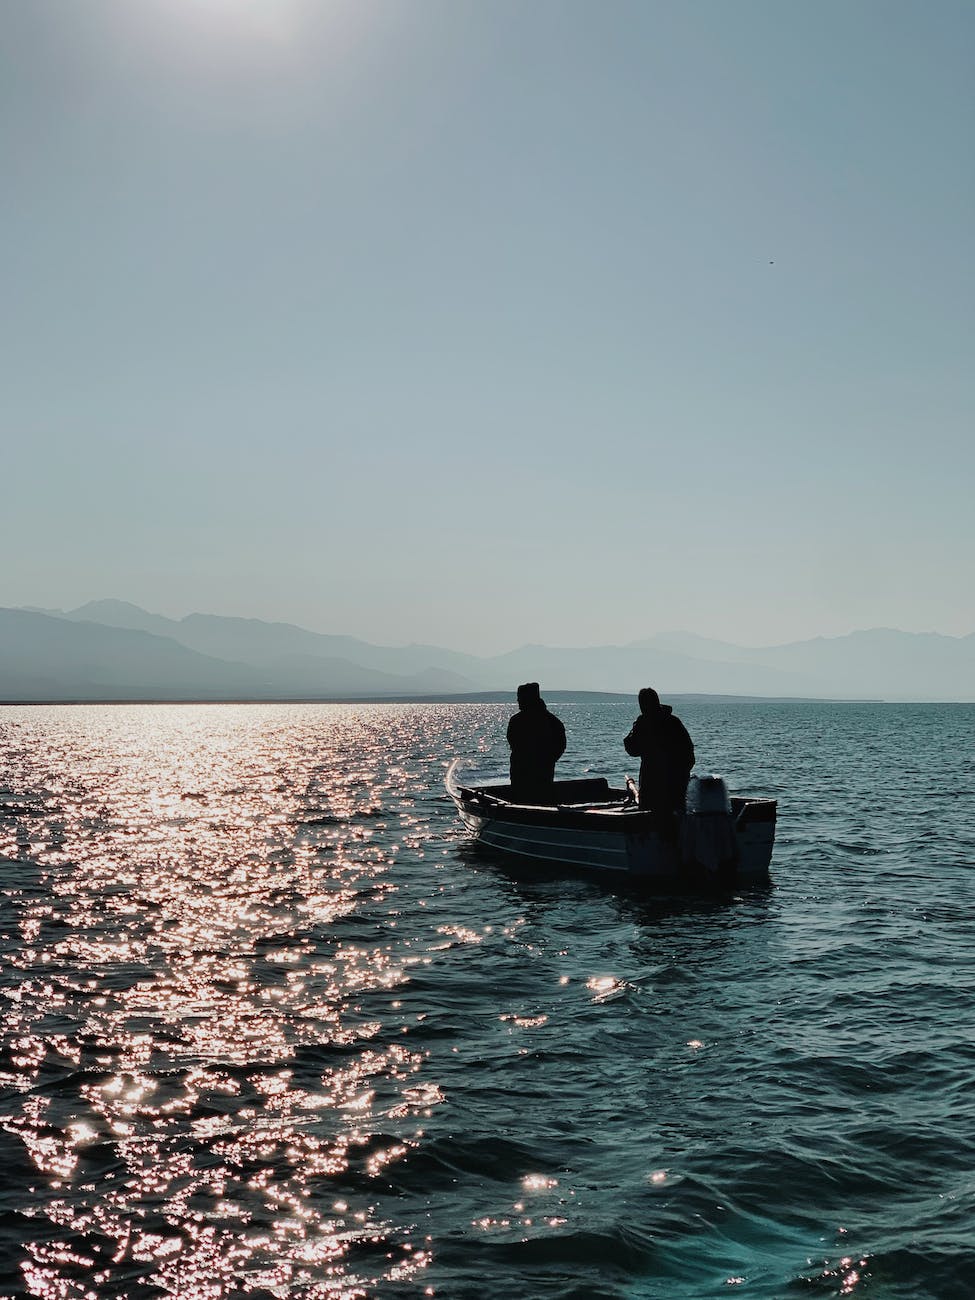 two people in a boat sailing on a sea